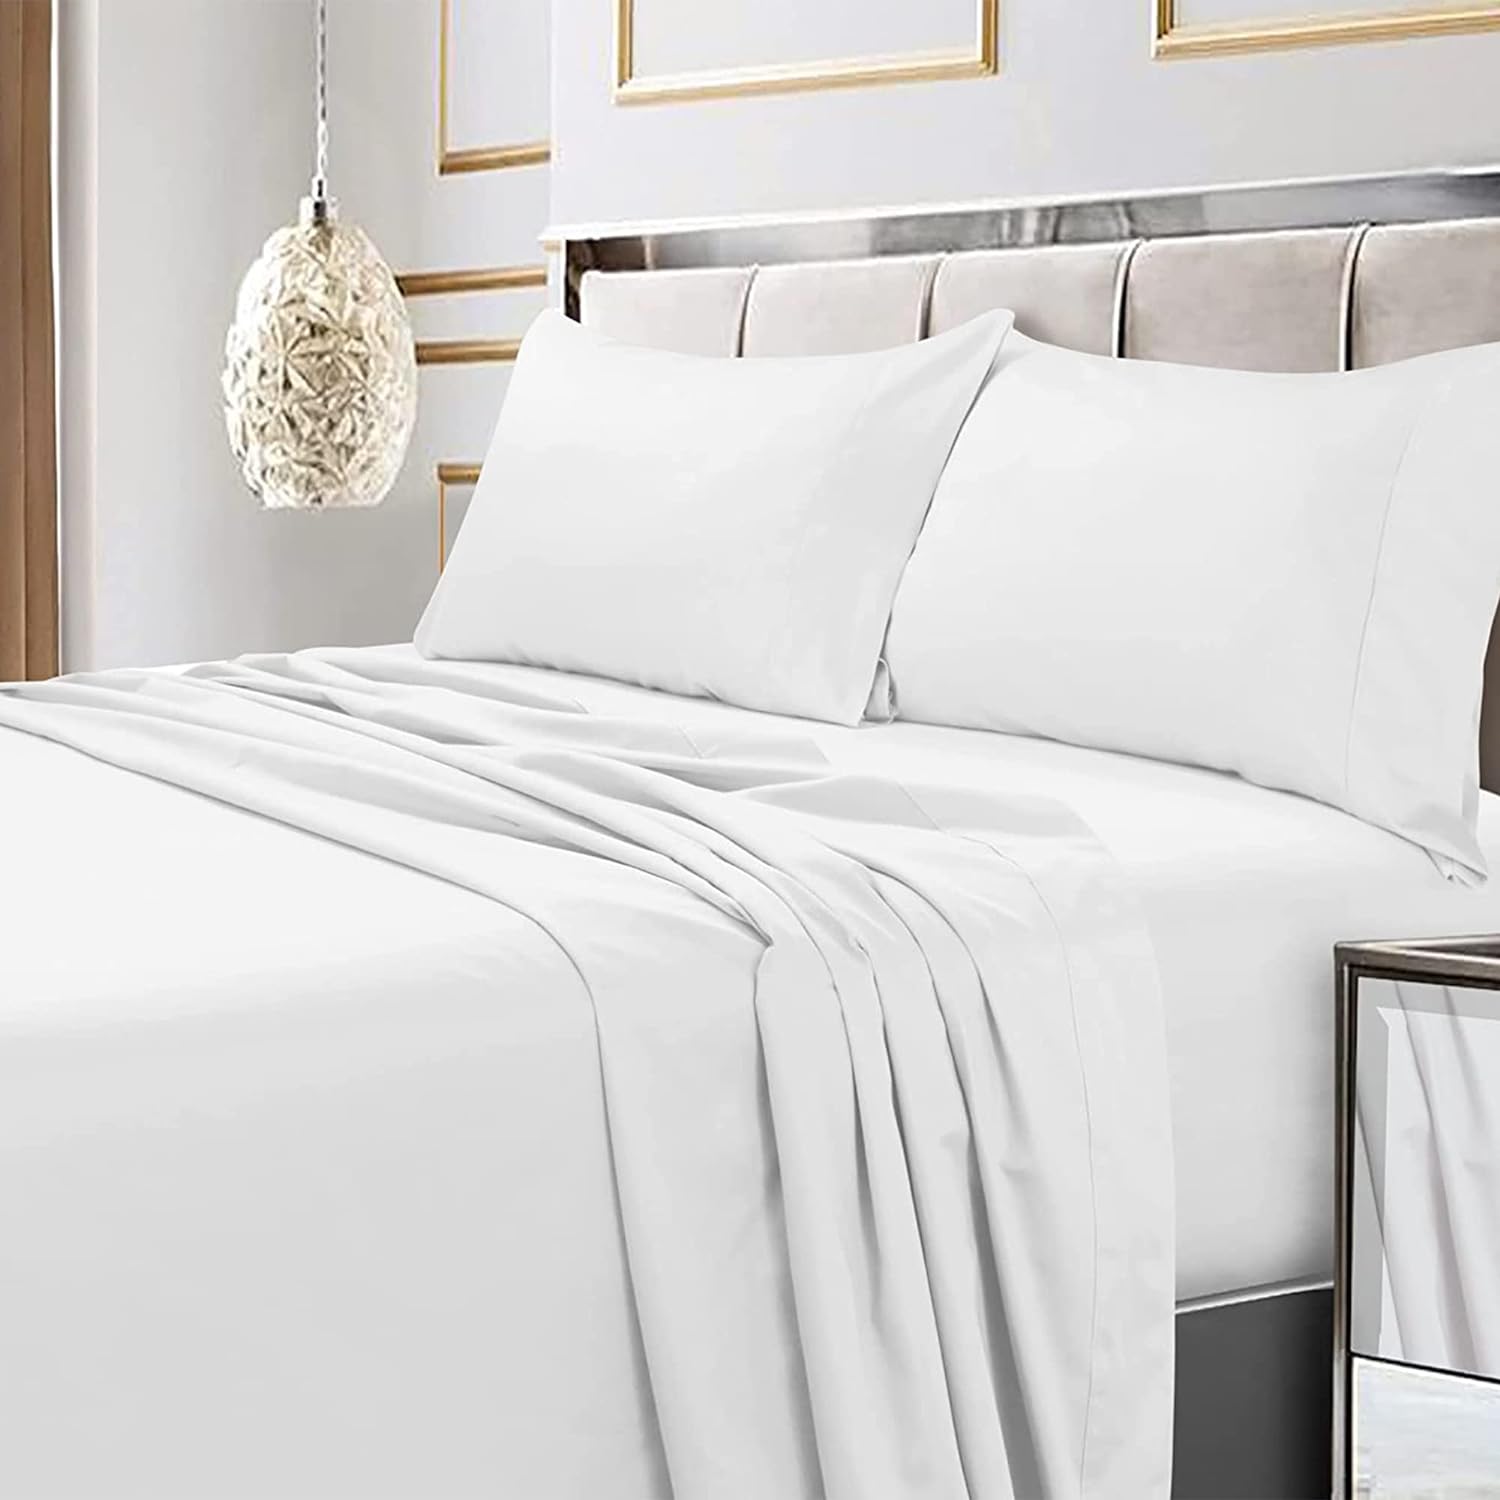 Tribeca Living Bed Soft Egyptian Cotton Sateen Solid Sheets and Pillowcase Set, Deep Pocket, 600 Thread Count, Cal King, White